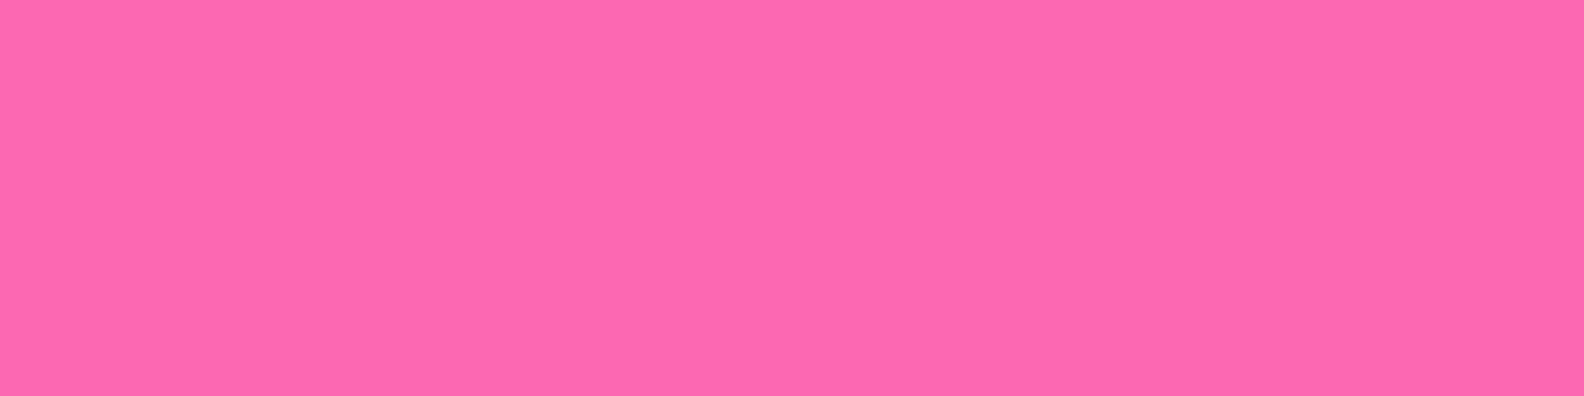 1584x396 Hot Pink Solid Color Background